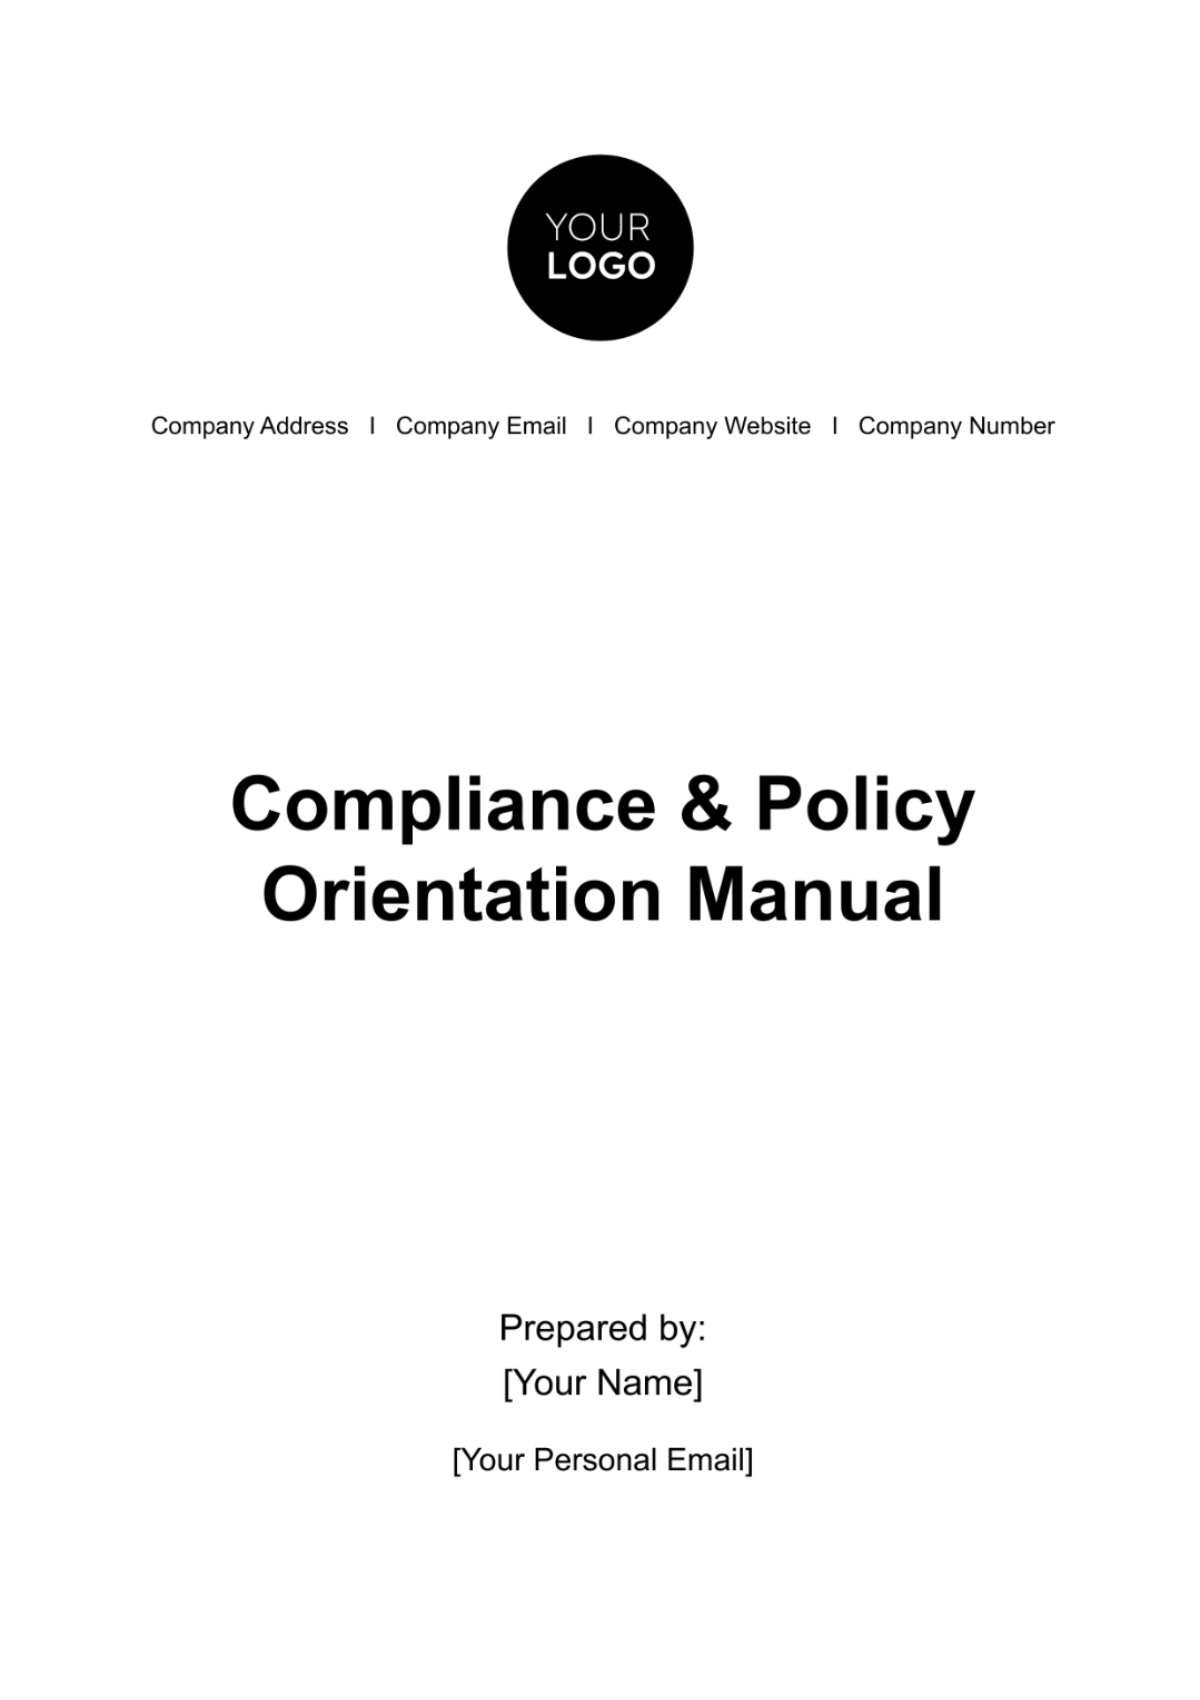 Compliance & Policy Orientation Manual HR Template